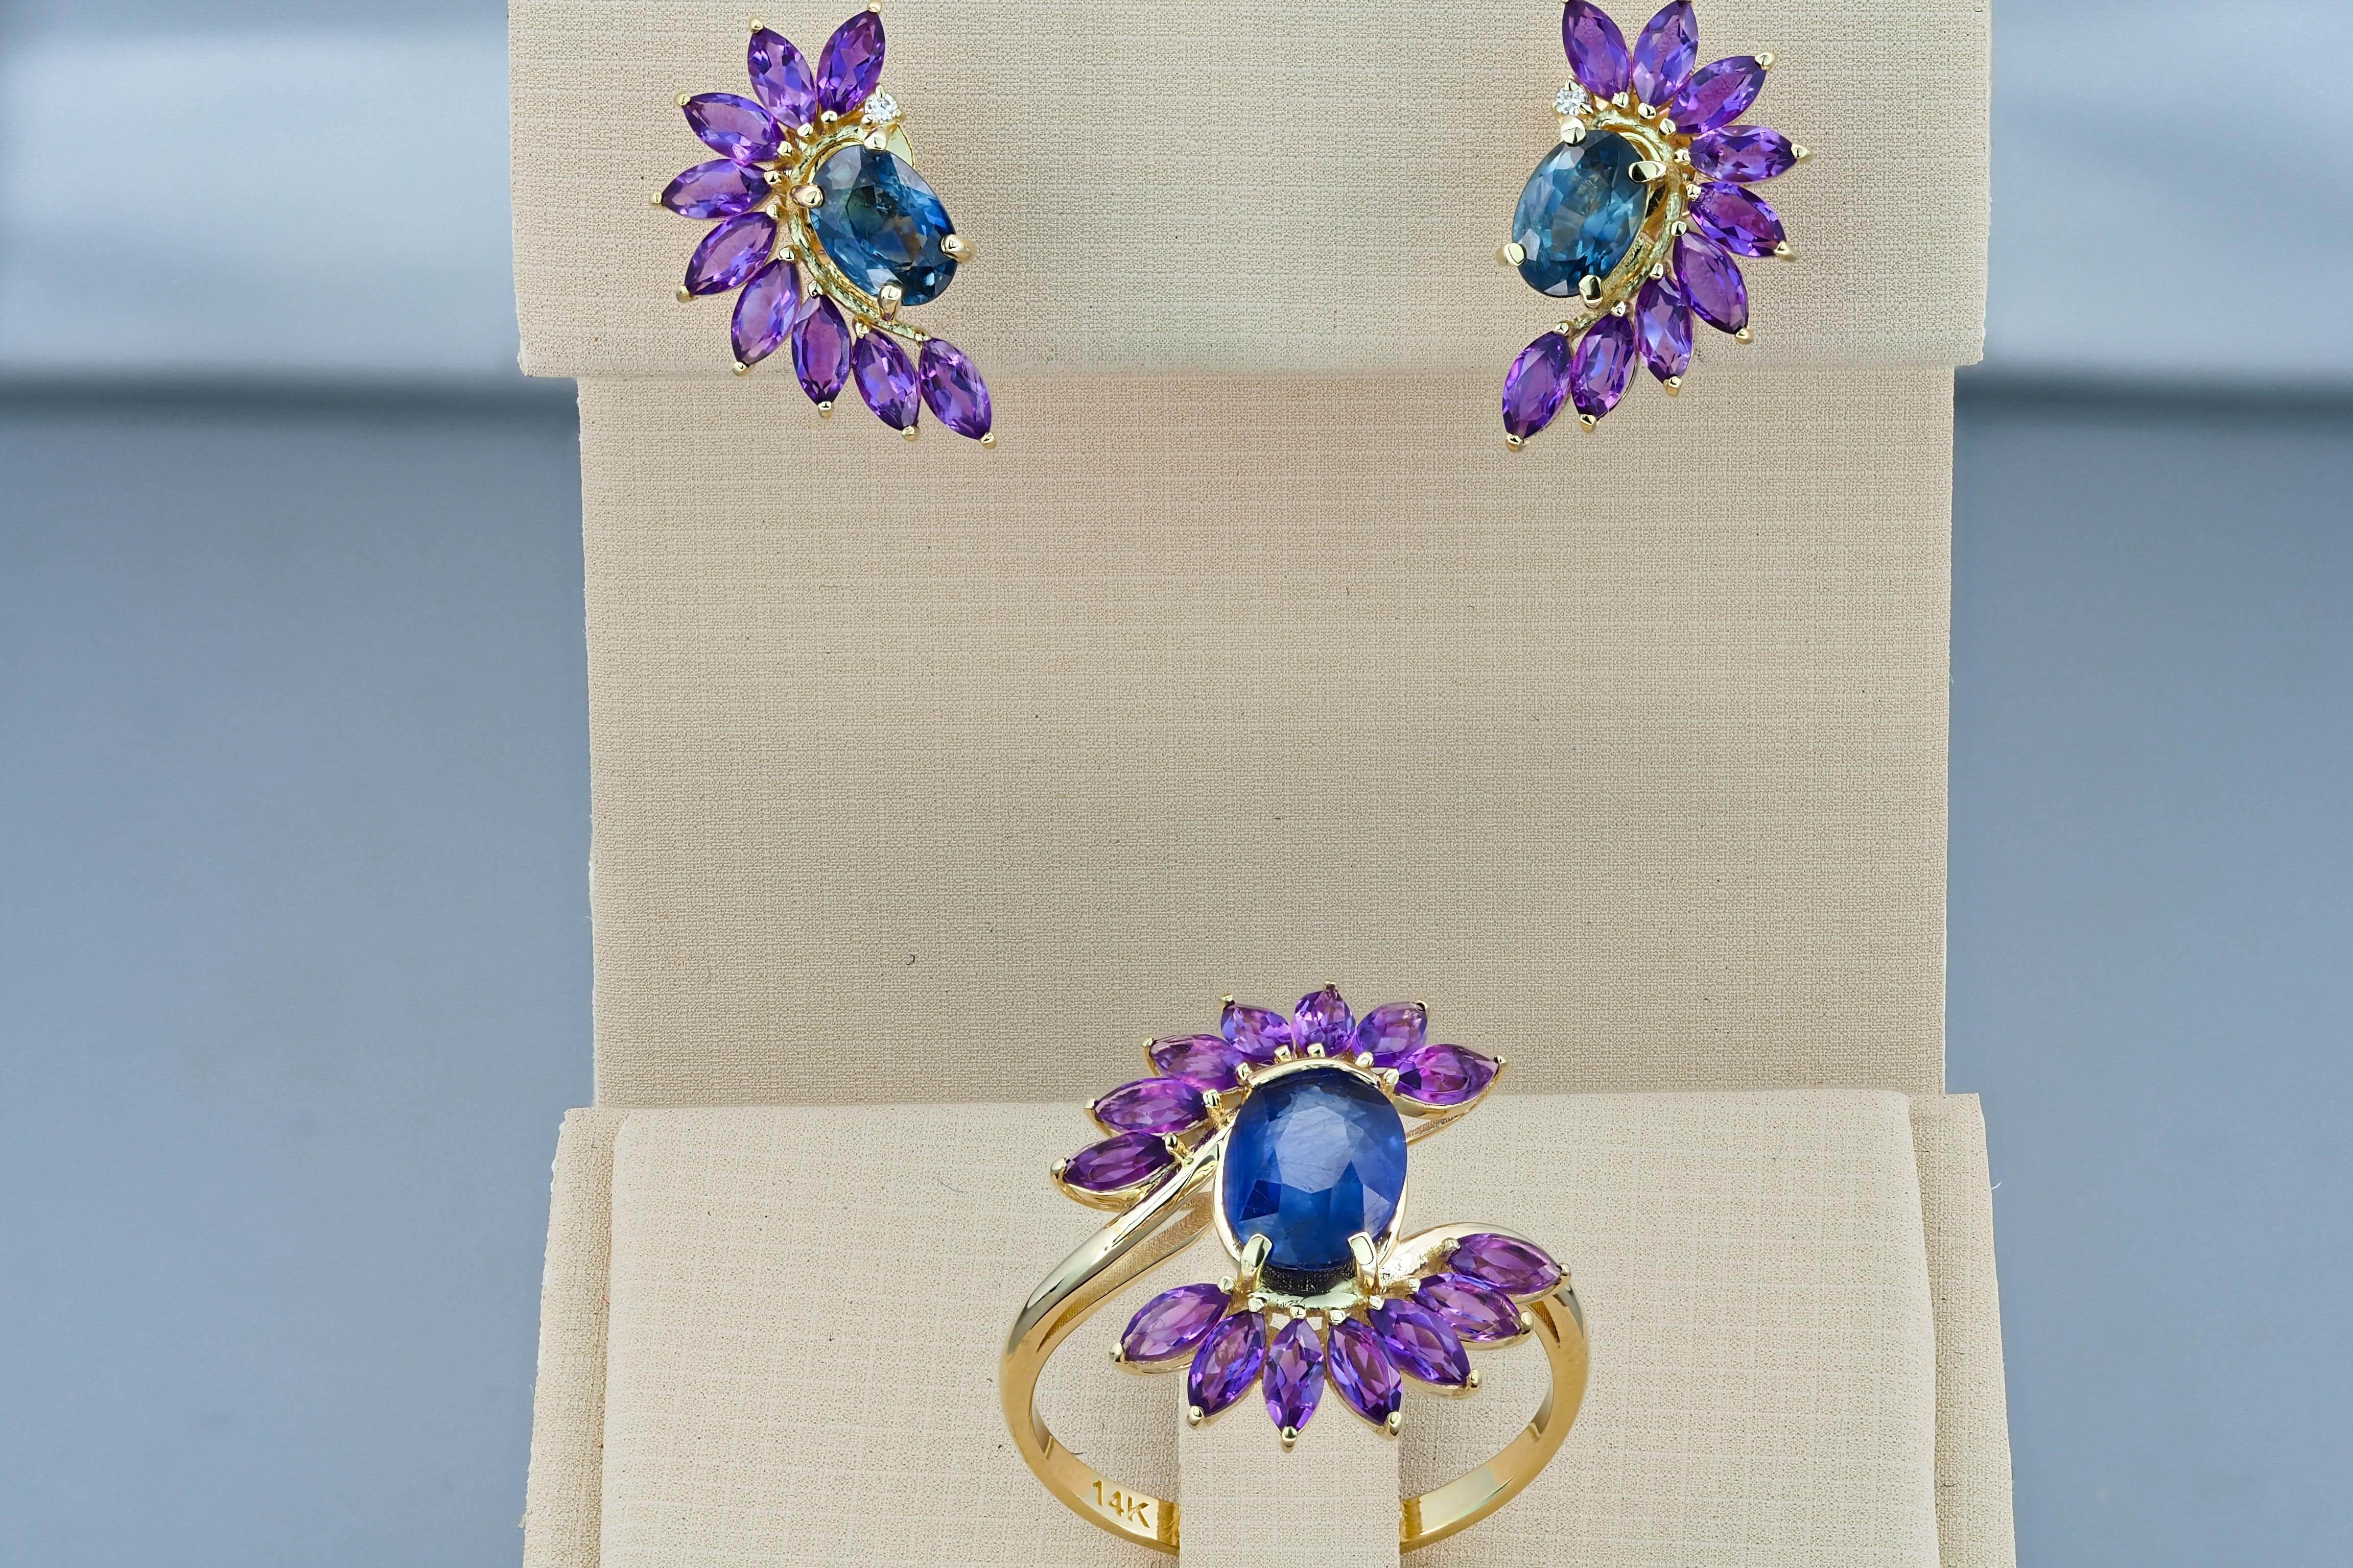 14 kt solid gold earrings and ring with natural sapphires, amethysts and diamonds.  
Total weight: 4.7 g.
Size Earrings: 10 x 16.6 mm.
Size rings face: 18.5 x 14 mm.

Central stones:
Natural sapphires - 3 pieces
Weight: approx 3 ct total, cut -